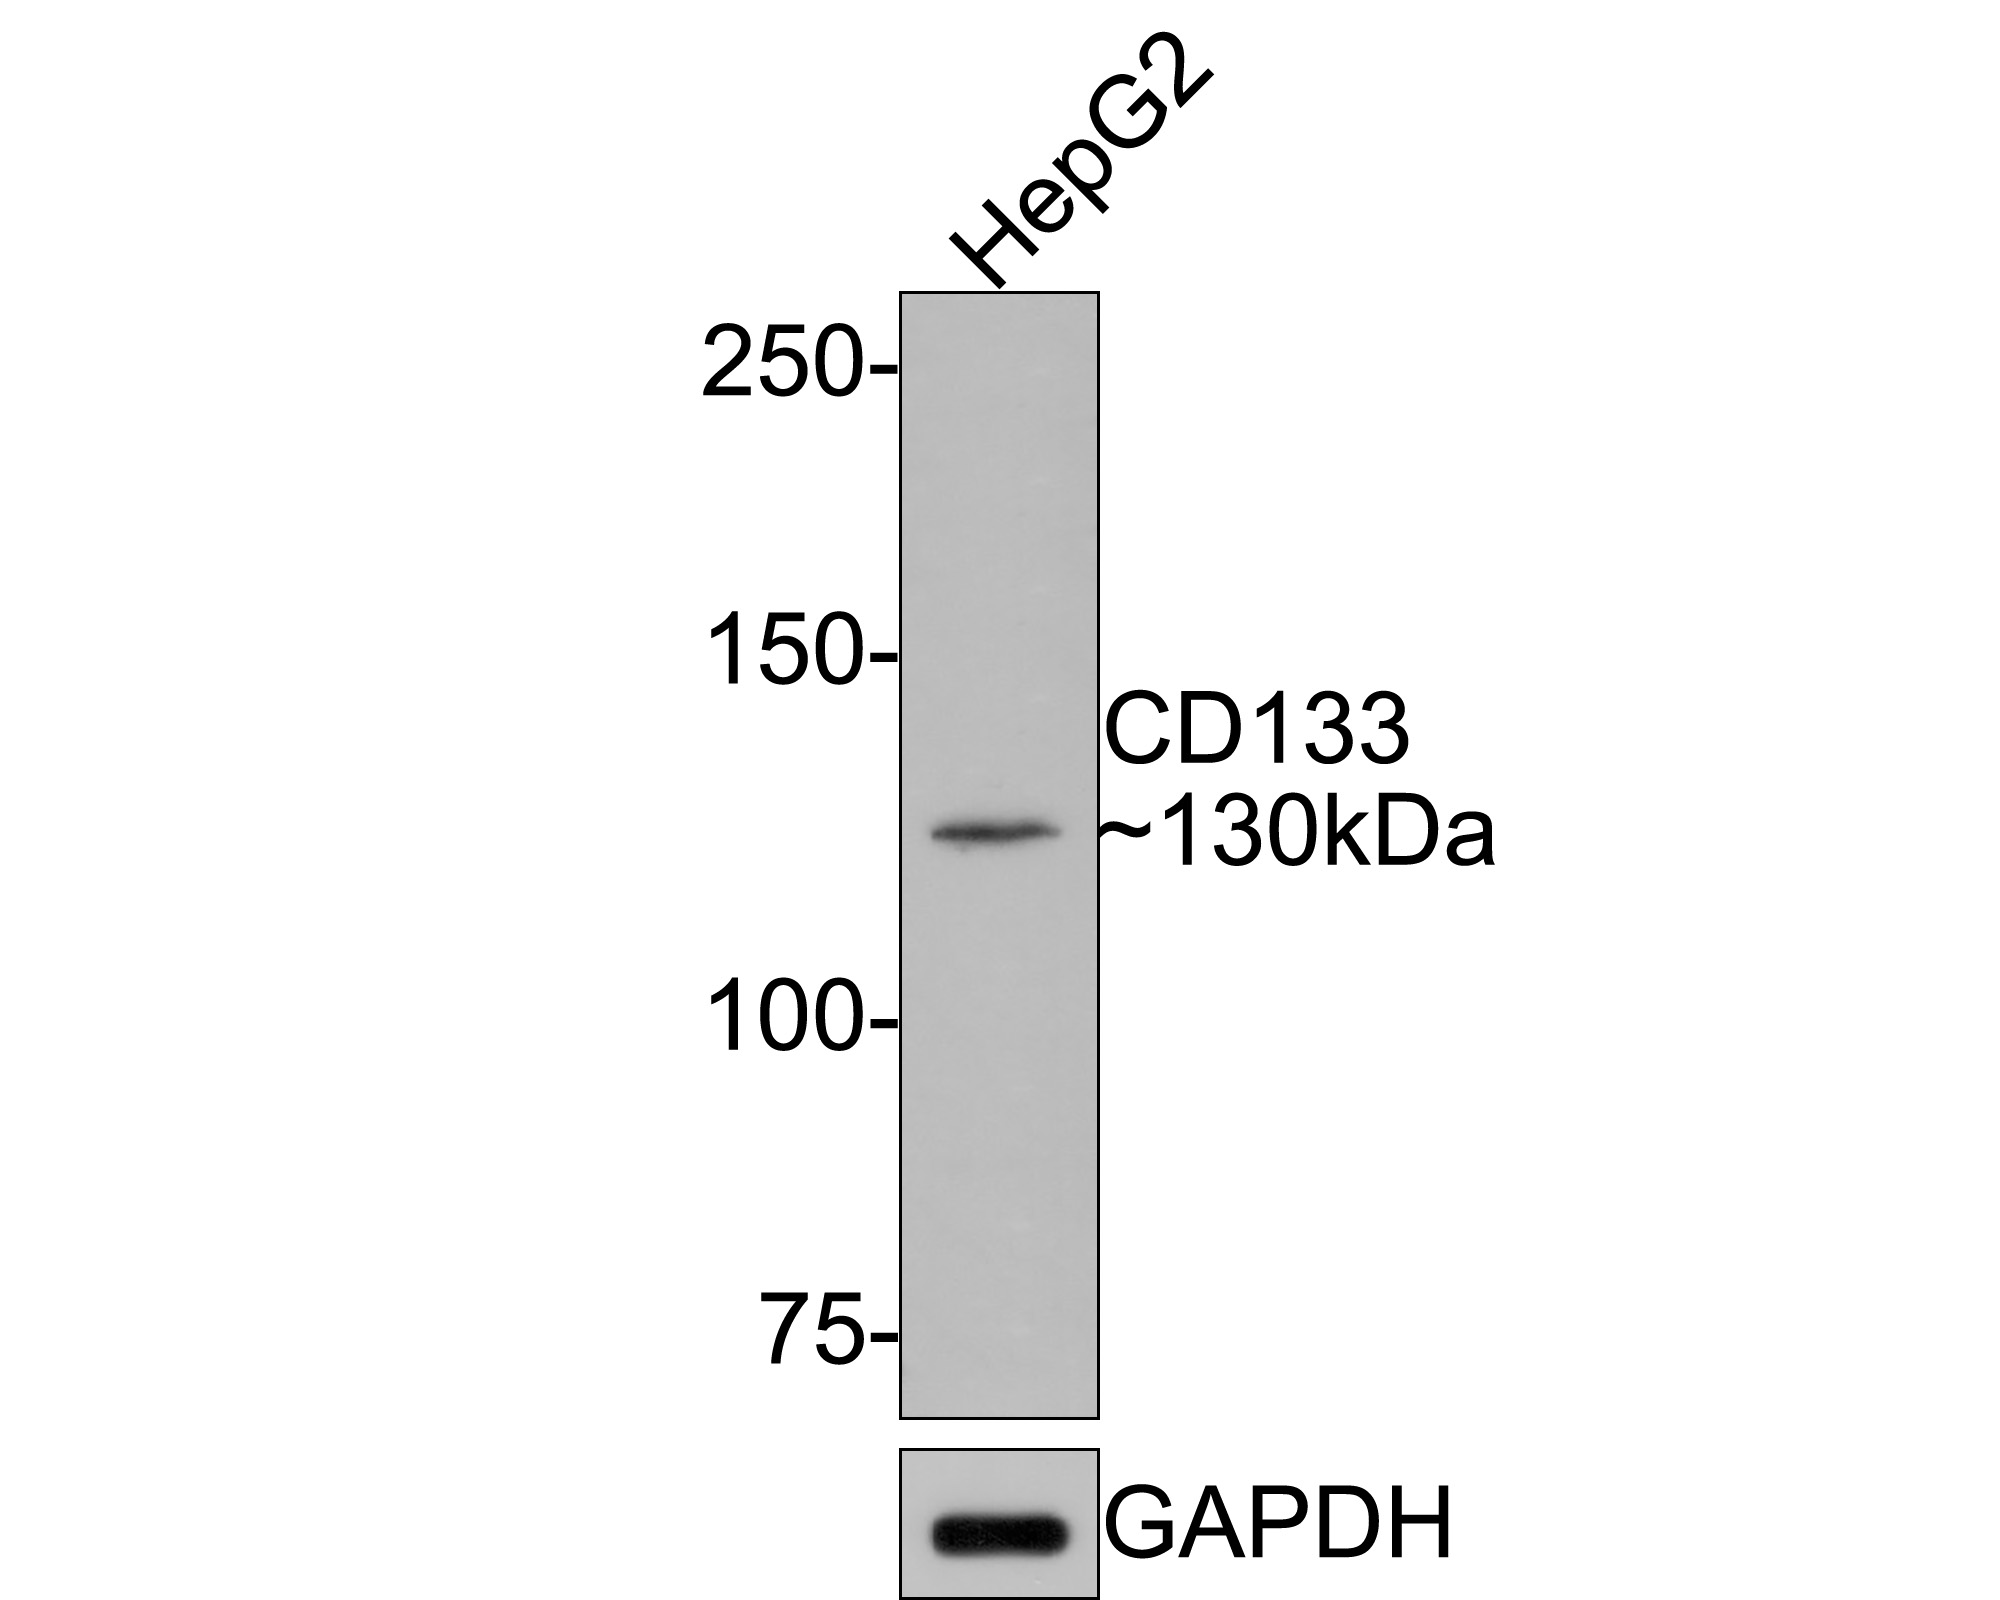 Western blot analysis of CD133 on HepG2 cell lysates with Mouse anti-CD133 antibody (HA601025) at 1/500 dilution.<br />
<br />
Lysates/proteins at 10 µg/Lane.<br />
<br />
Predicted band size: 97 kDa<br />
Observed band size: 110 kDa<br />
<br />
Exposure time: 2 minutes;<br />
<br />
8% SDS-PAGE gel.<br />
<br />
Proteins were transferred to a PVDF membrane and blocked with 5% NFDM/TBST for 1 hour at room temperature. The primary antibody (HA601025) at 1/500 dilution was used in 5% NFDM/TBST at room temperature for 2 hours. Goat Anti-Mouse IgG - HRP Secondary Antibody (HA1006) at 1:100,000 dilution was used for 1 hour at room temperature.